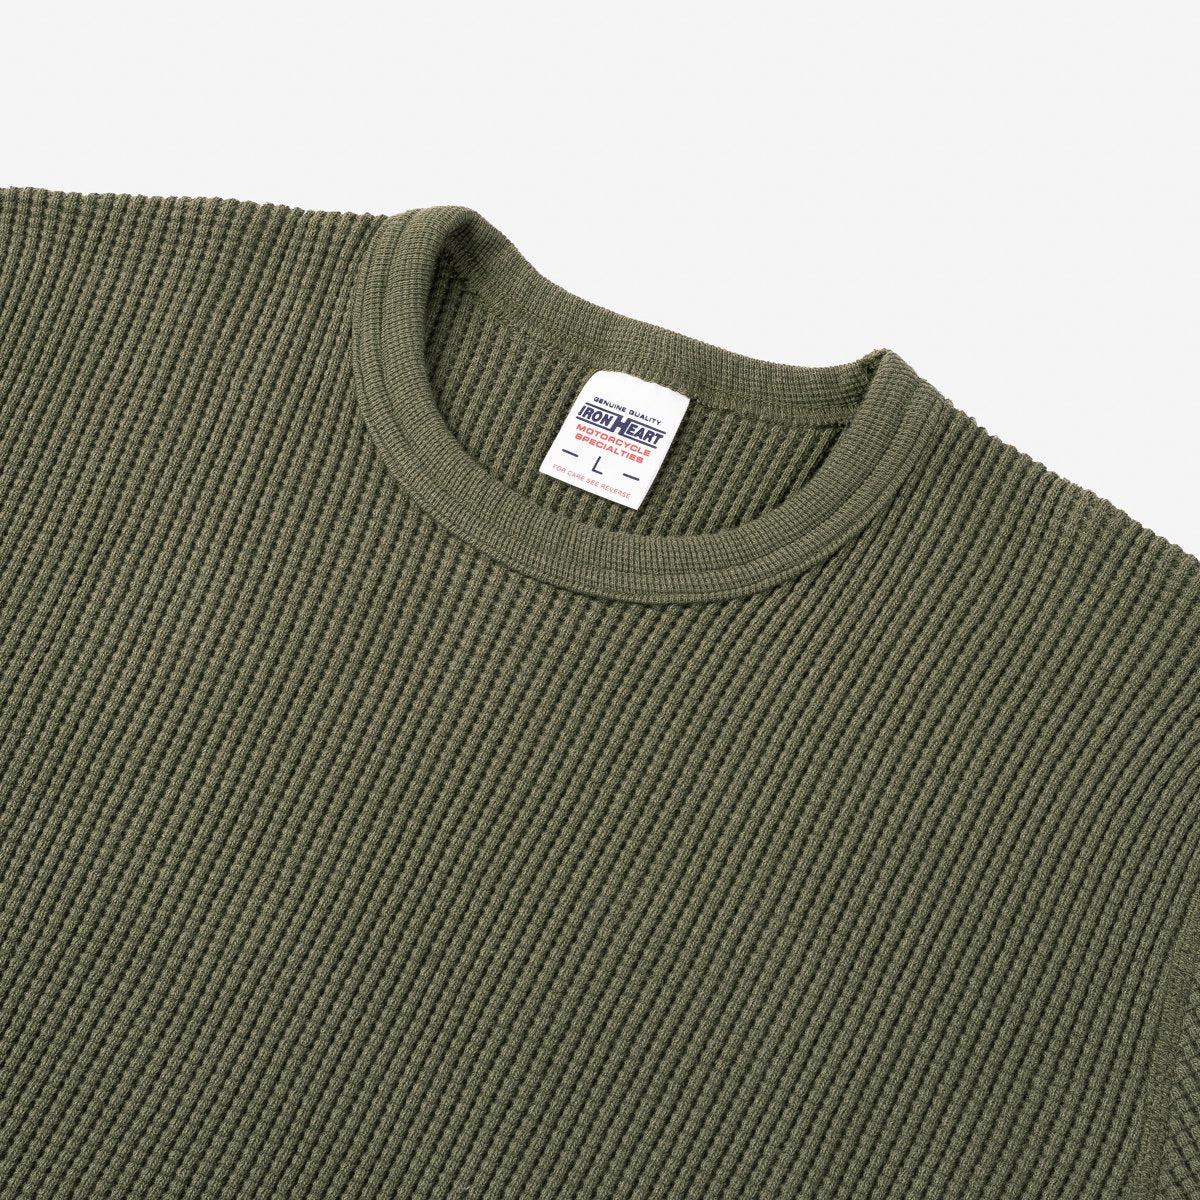 IHTL-1301-OLV Long Sleeve Thermal Crew Neck Olive